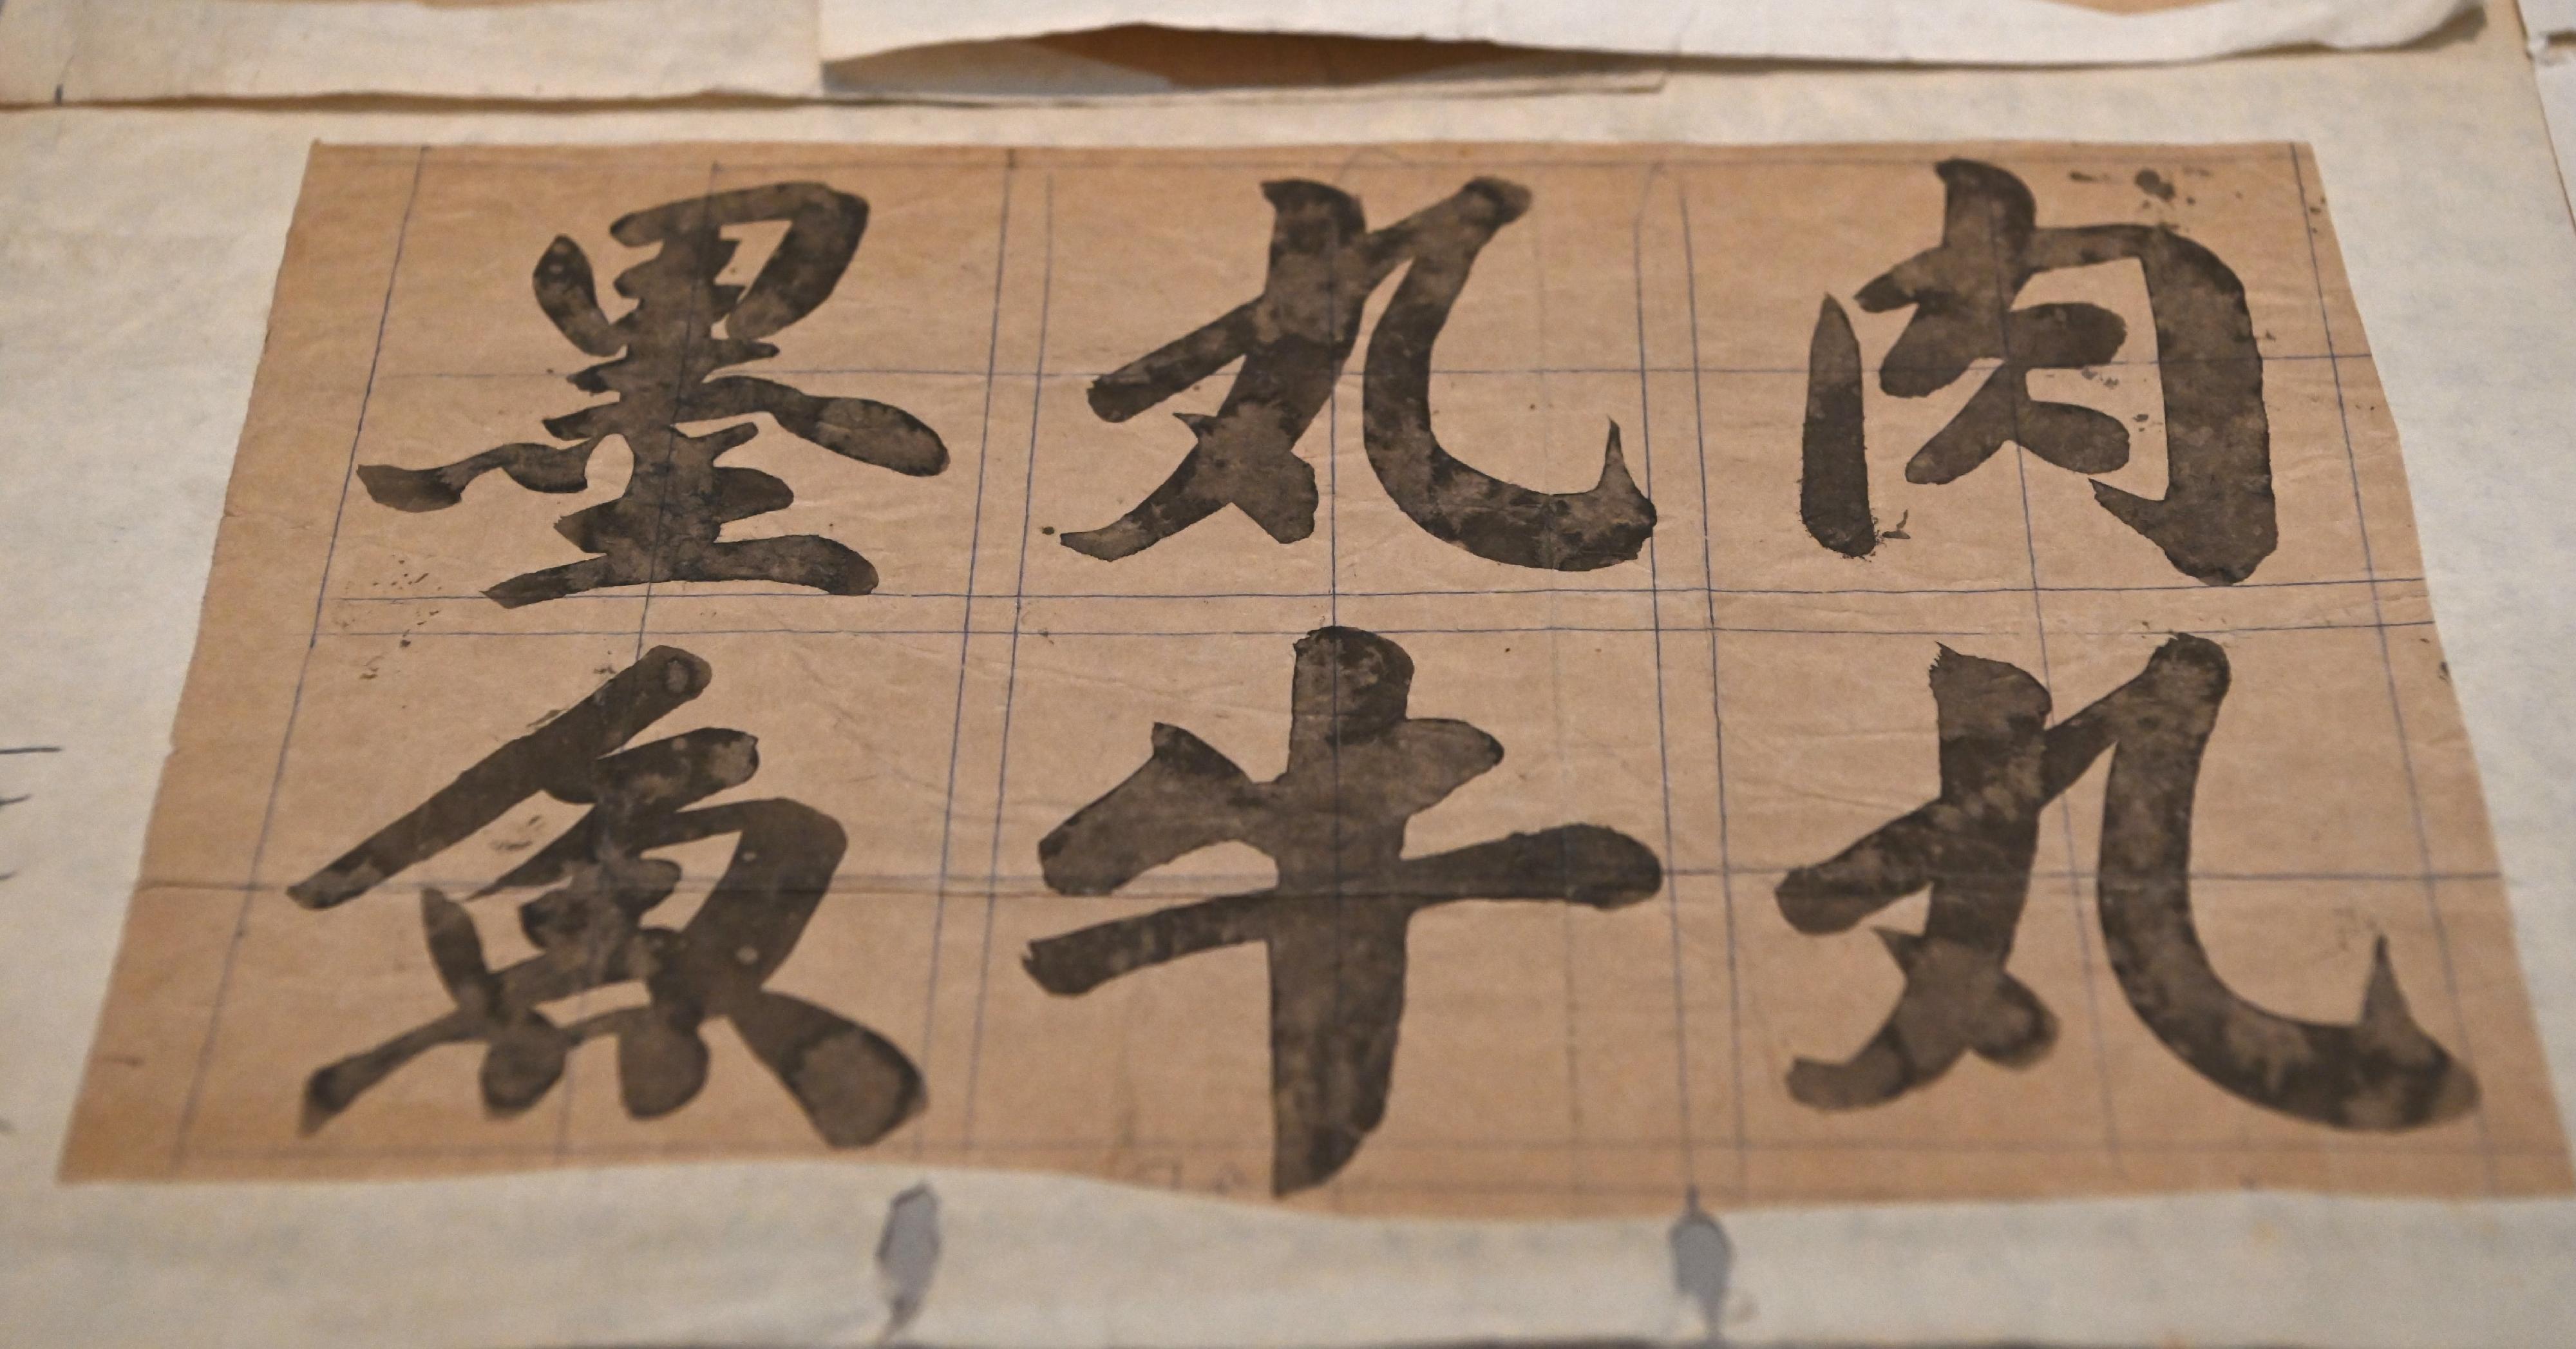 The "By the People: Creative Chinese Characters" exhibition will be staged from tomorrow (September 9) at the Hong Kong Museum of Art. Picture shows the manuscript of "Lee Hon Kong Kai" by Lee Hon.